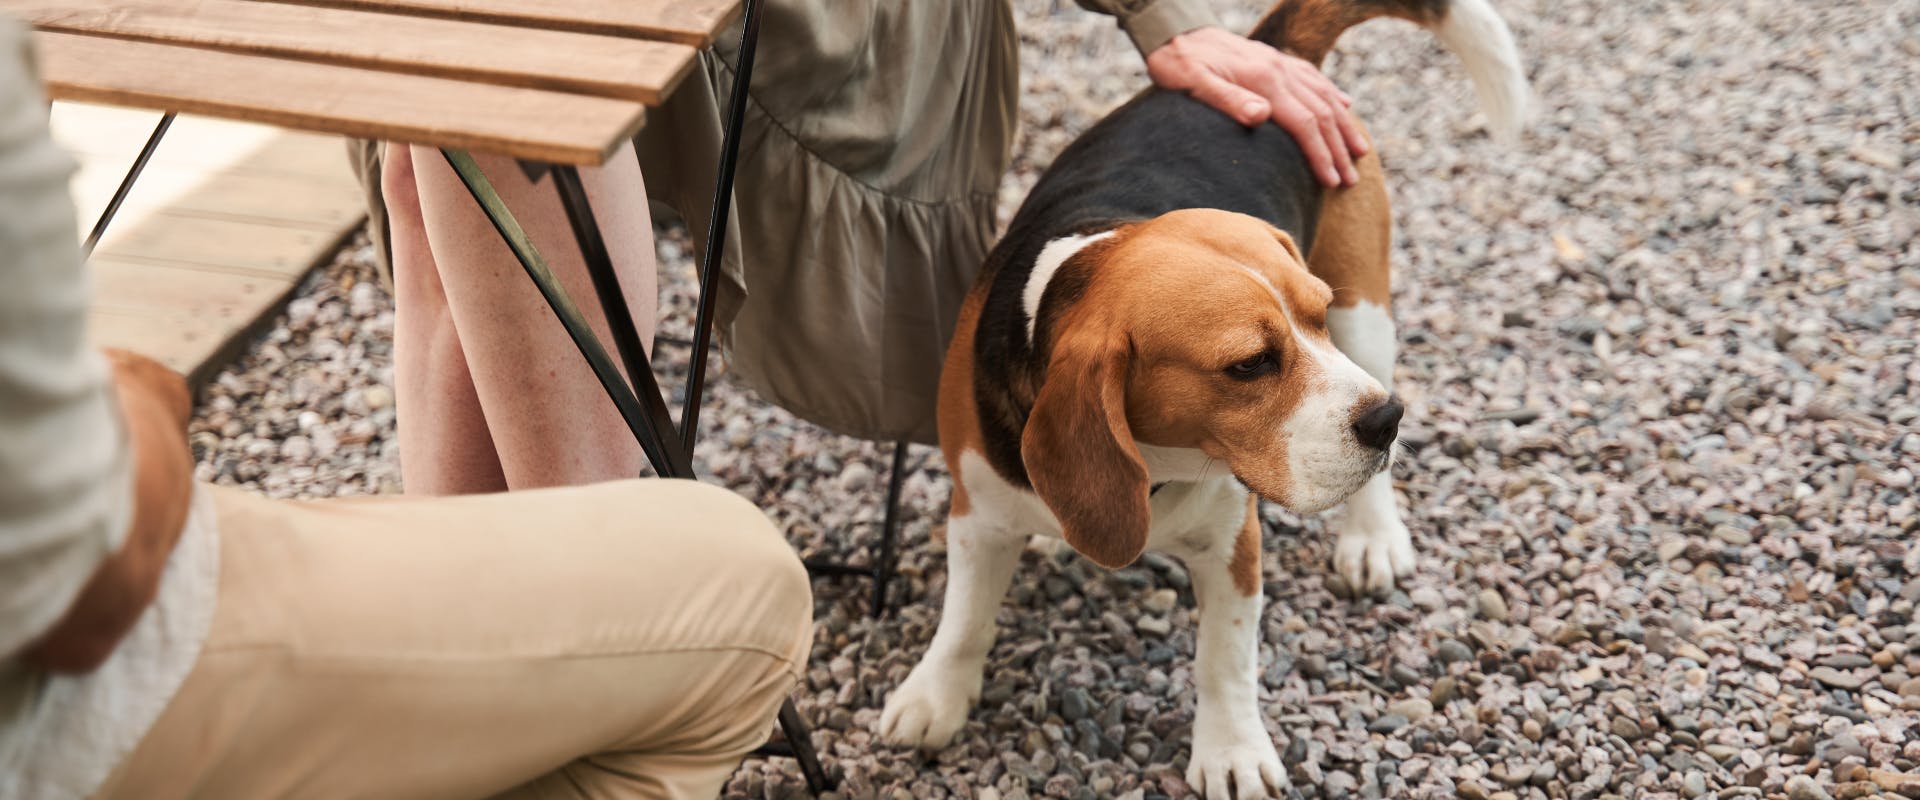 beagle being stroked in an outdoor patio